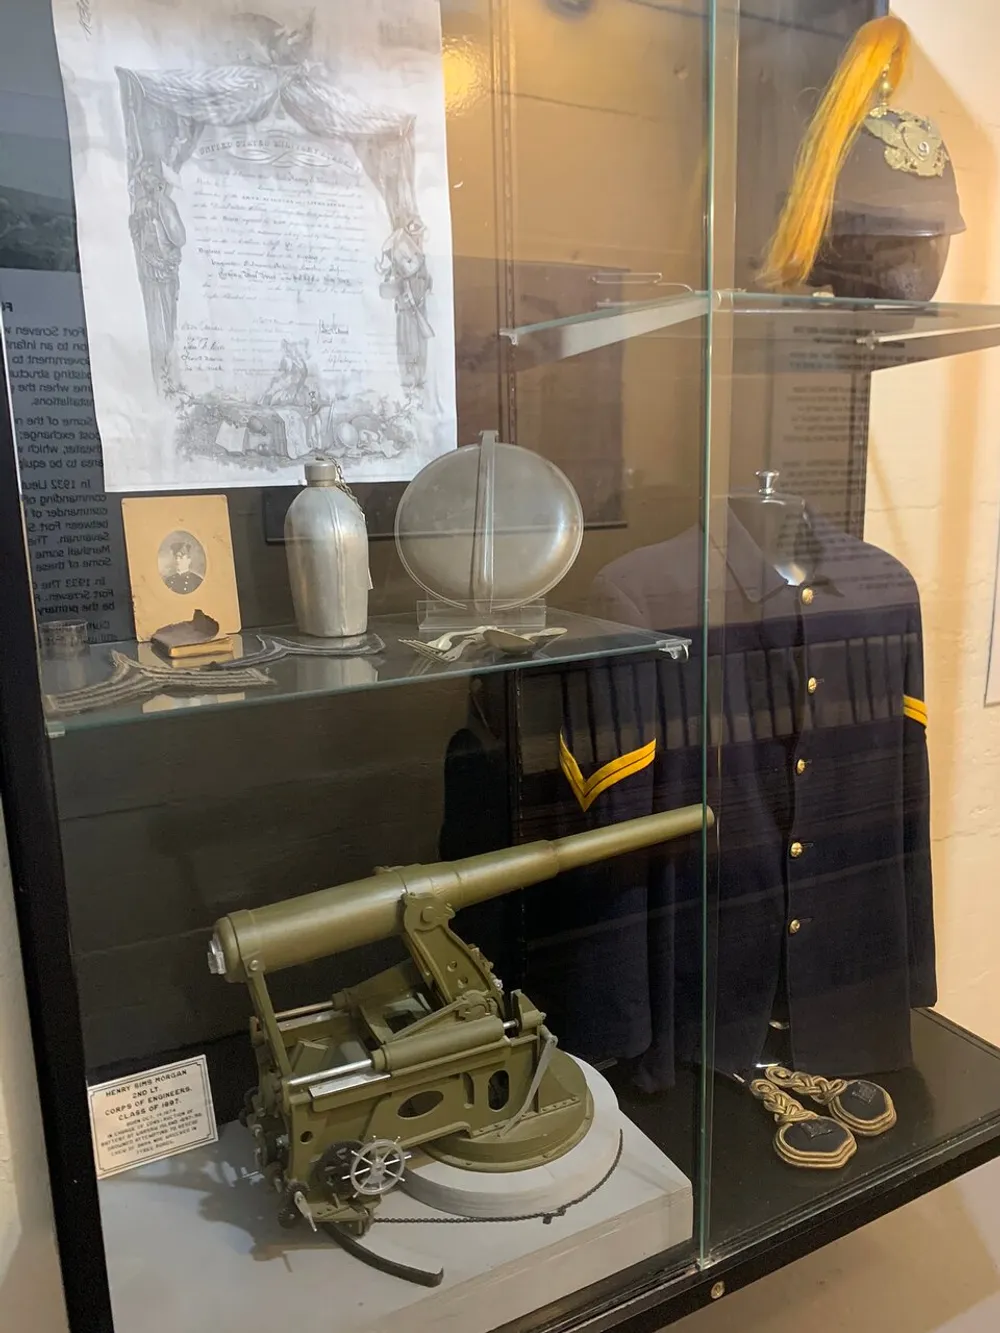 The image shows a display case containing military memorabilia including a model of a heavy machine gun a canteen uniform with rank insignia a helmet with a plume and other items likely part of a historical exhibit